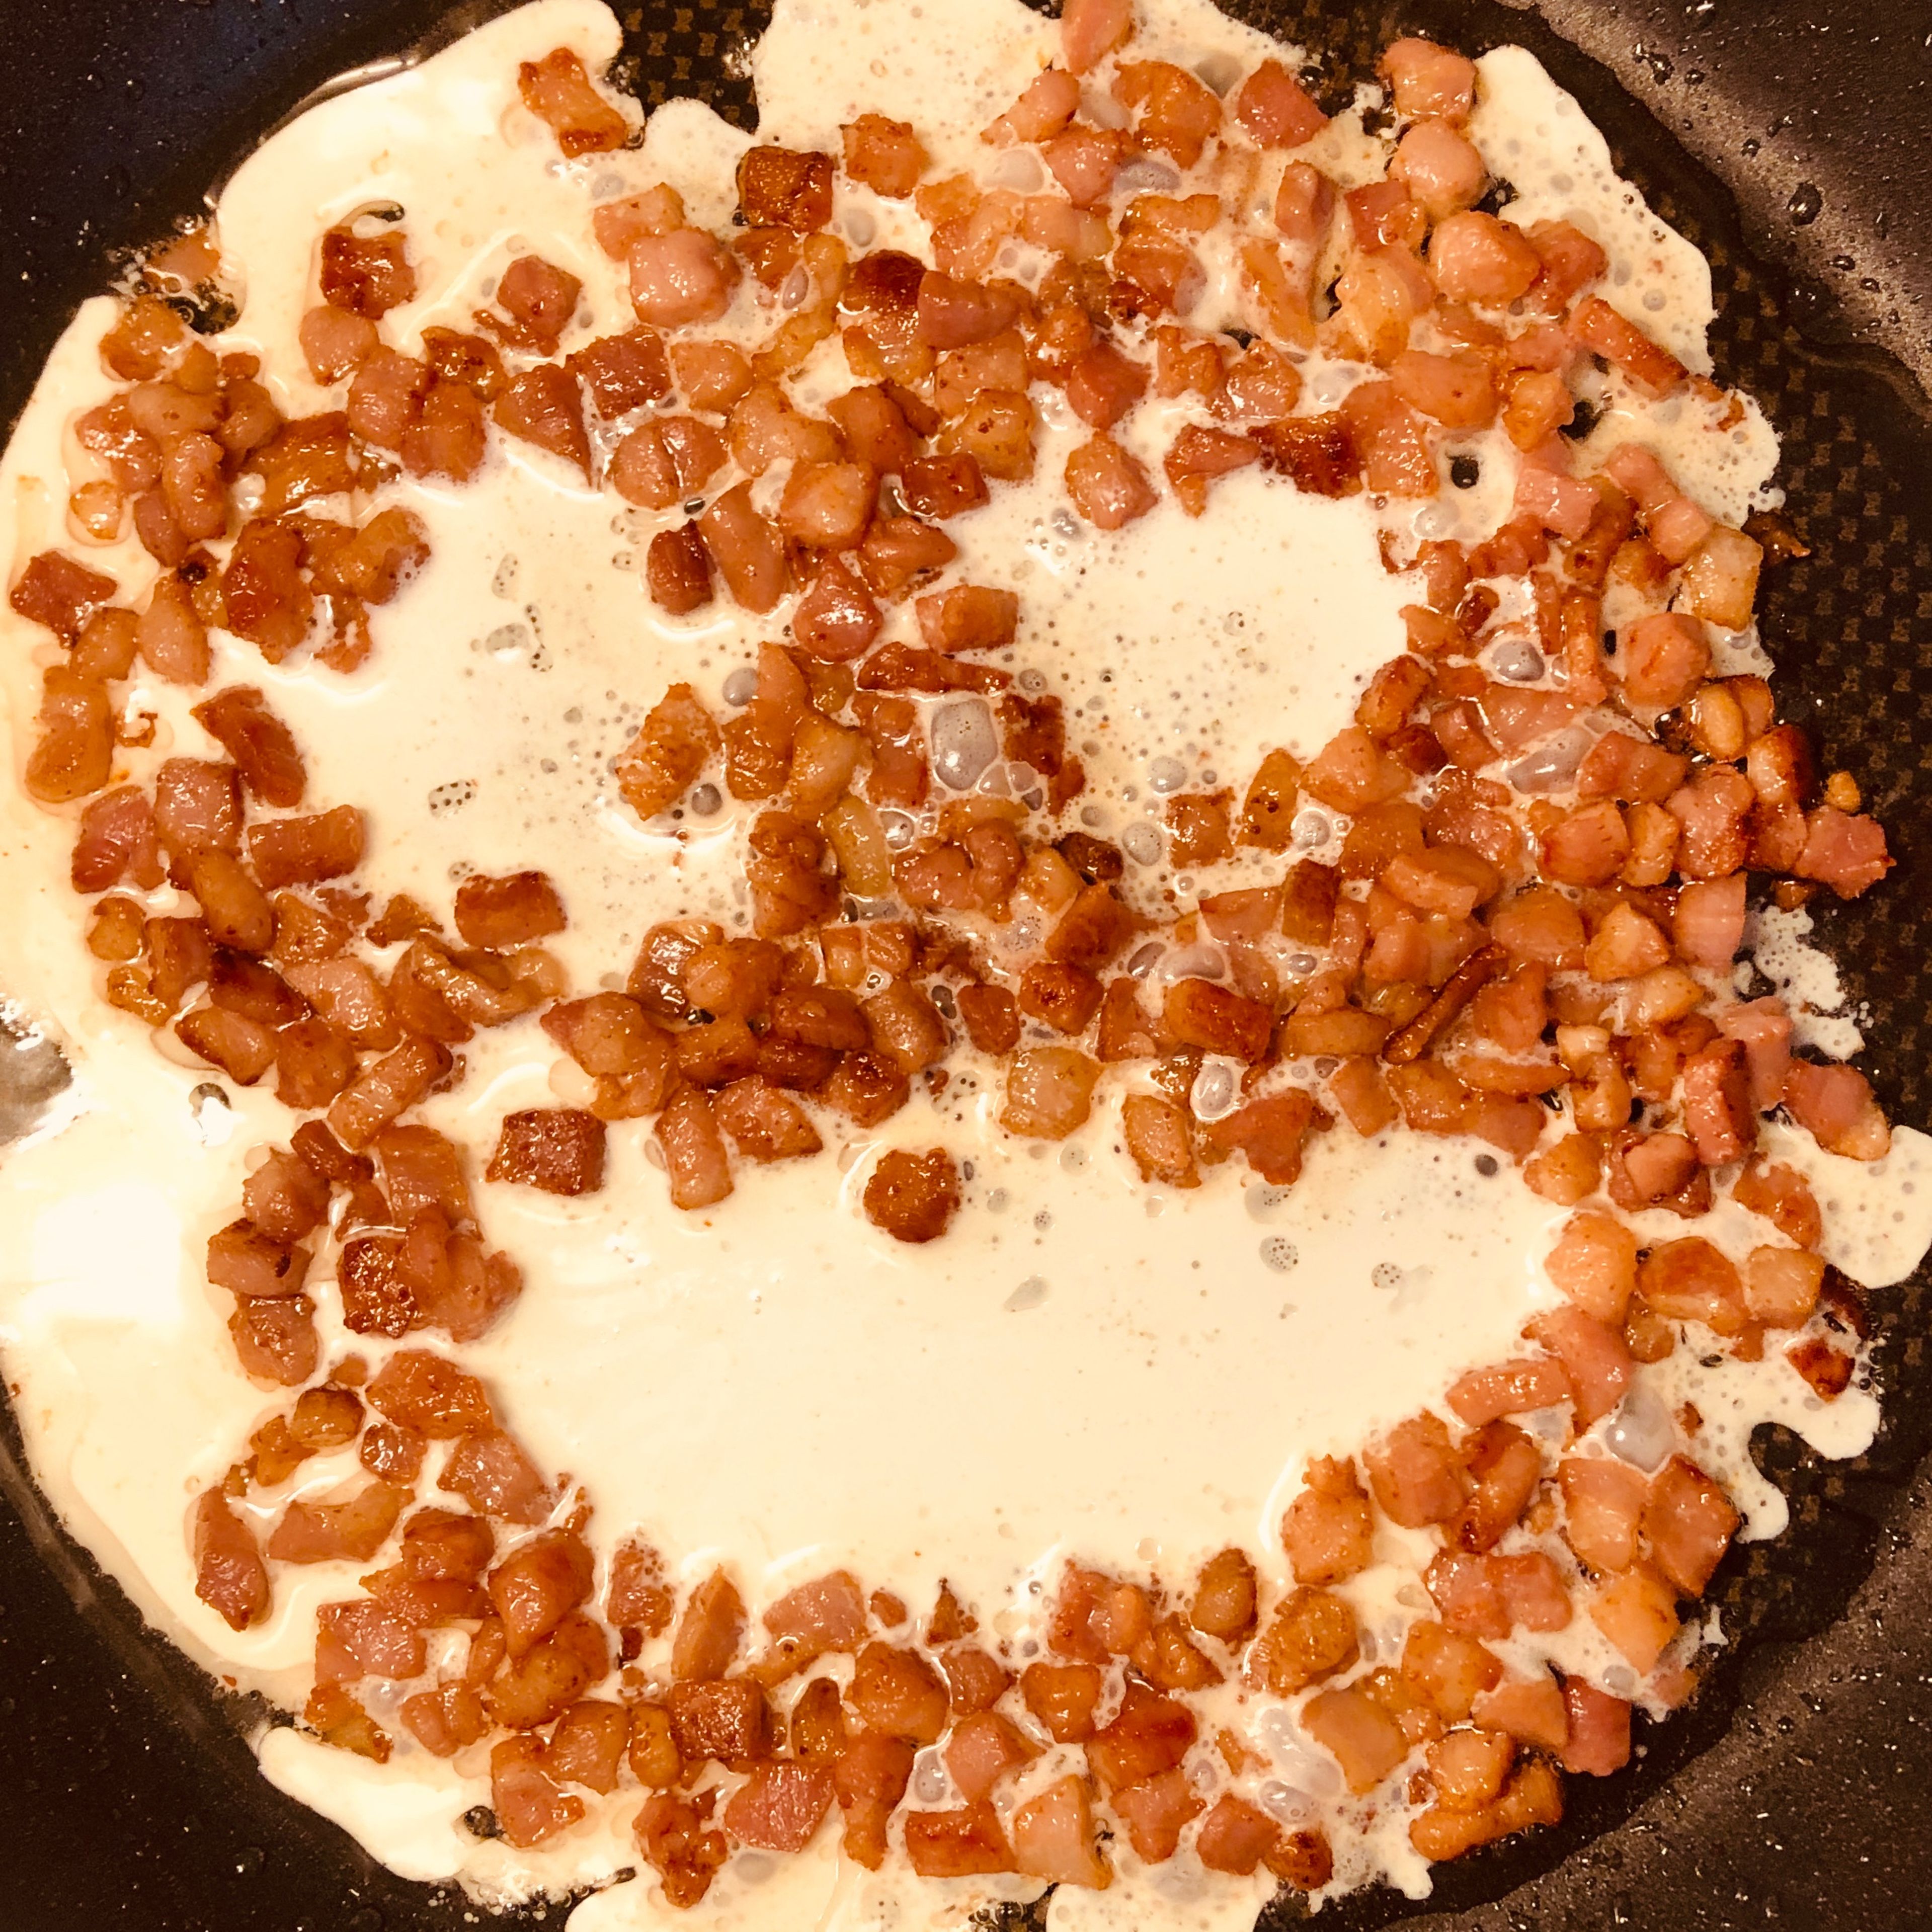 Fry the bacon. Add the cream before the bacon parts get too burned. Add the cheese to the sause gradually. Let the sause sipper, add more cheese to control the consistency. Add pepper to the sause. Cook the spaghetti, add very little salt.